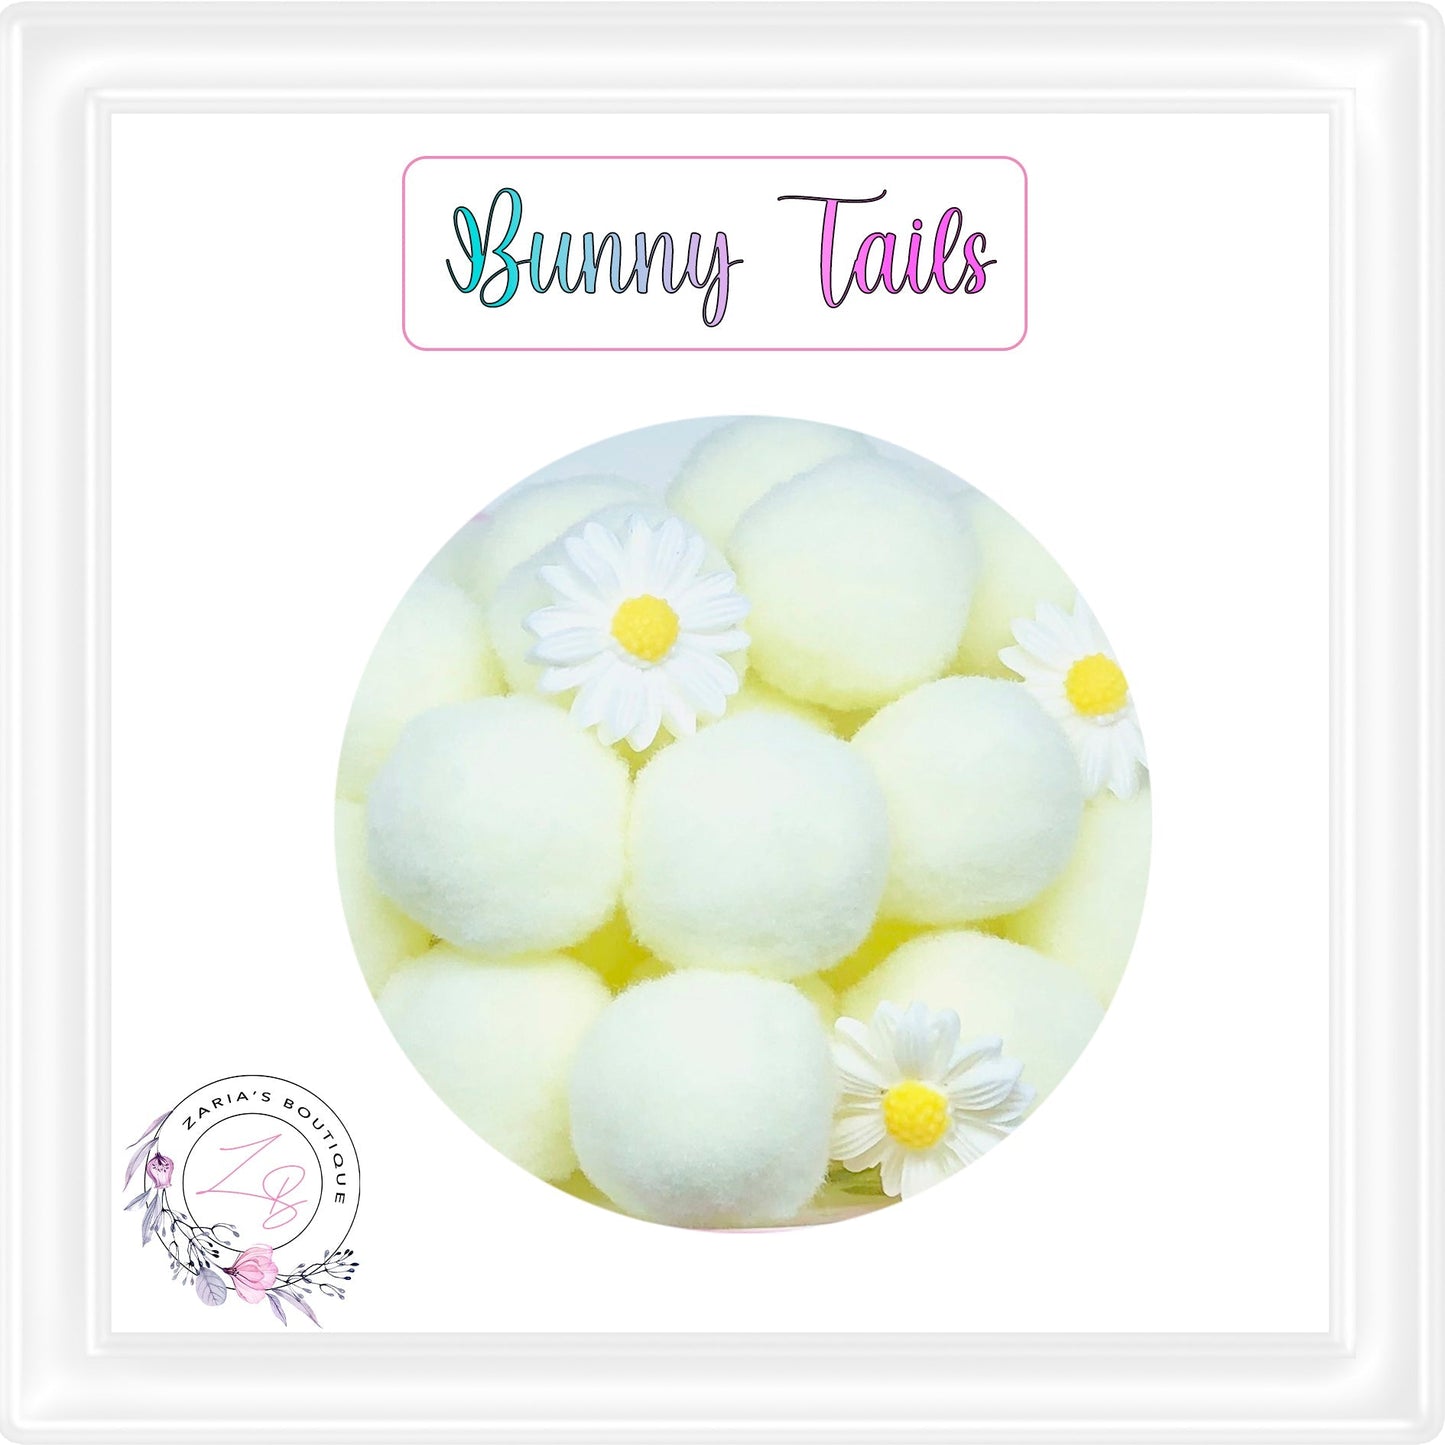 ⋅ Bunny Tails ⋅ 25mm Pom Poms ⋅ Grey ⋅ Easter Embellishment ⋅ 10 pieces ⋅